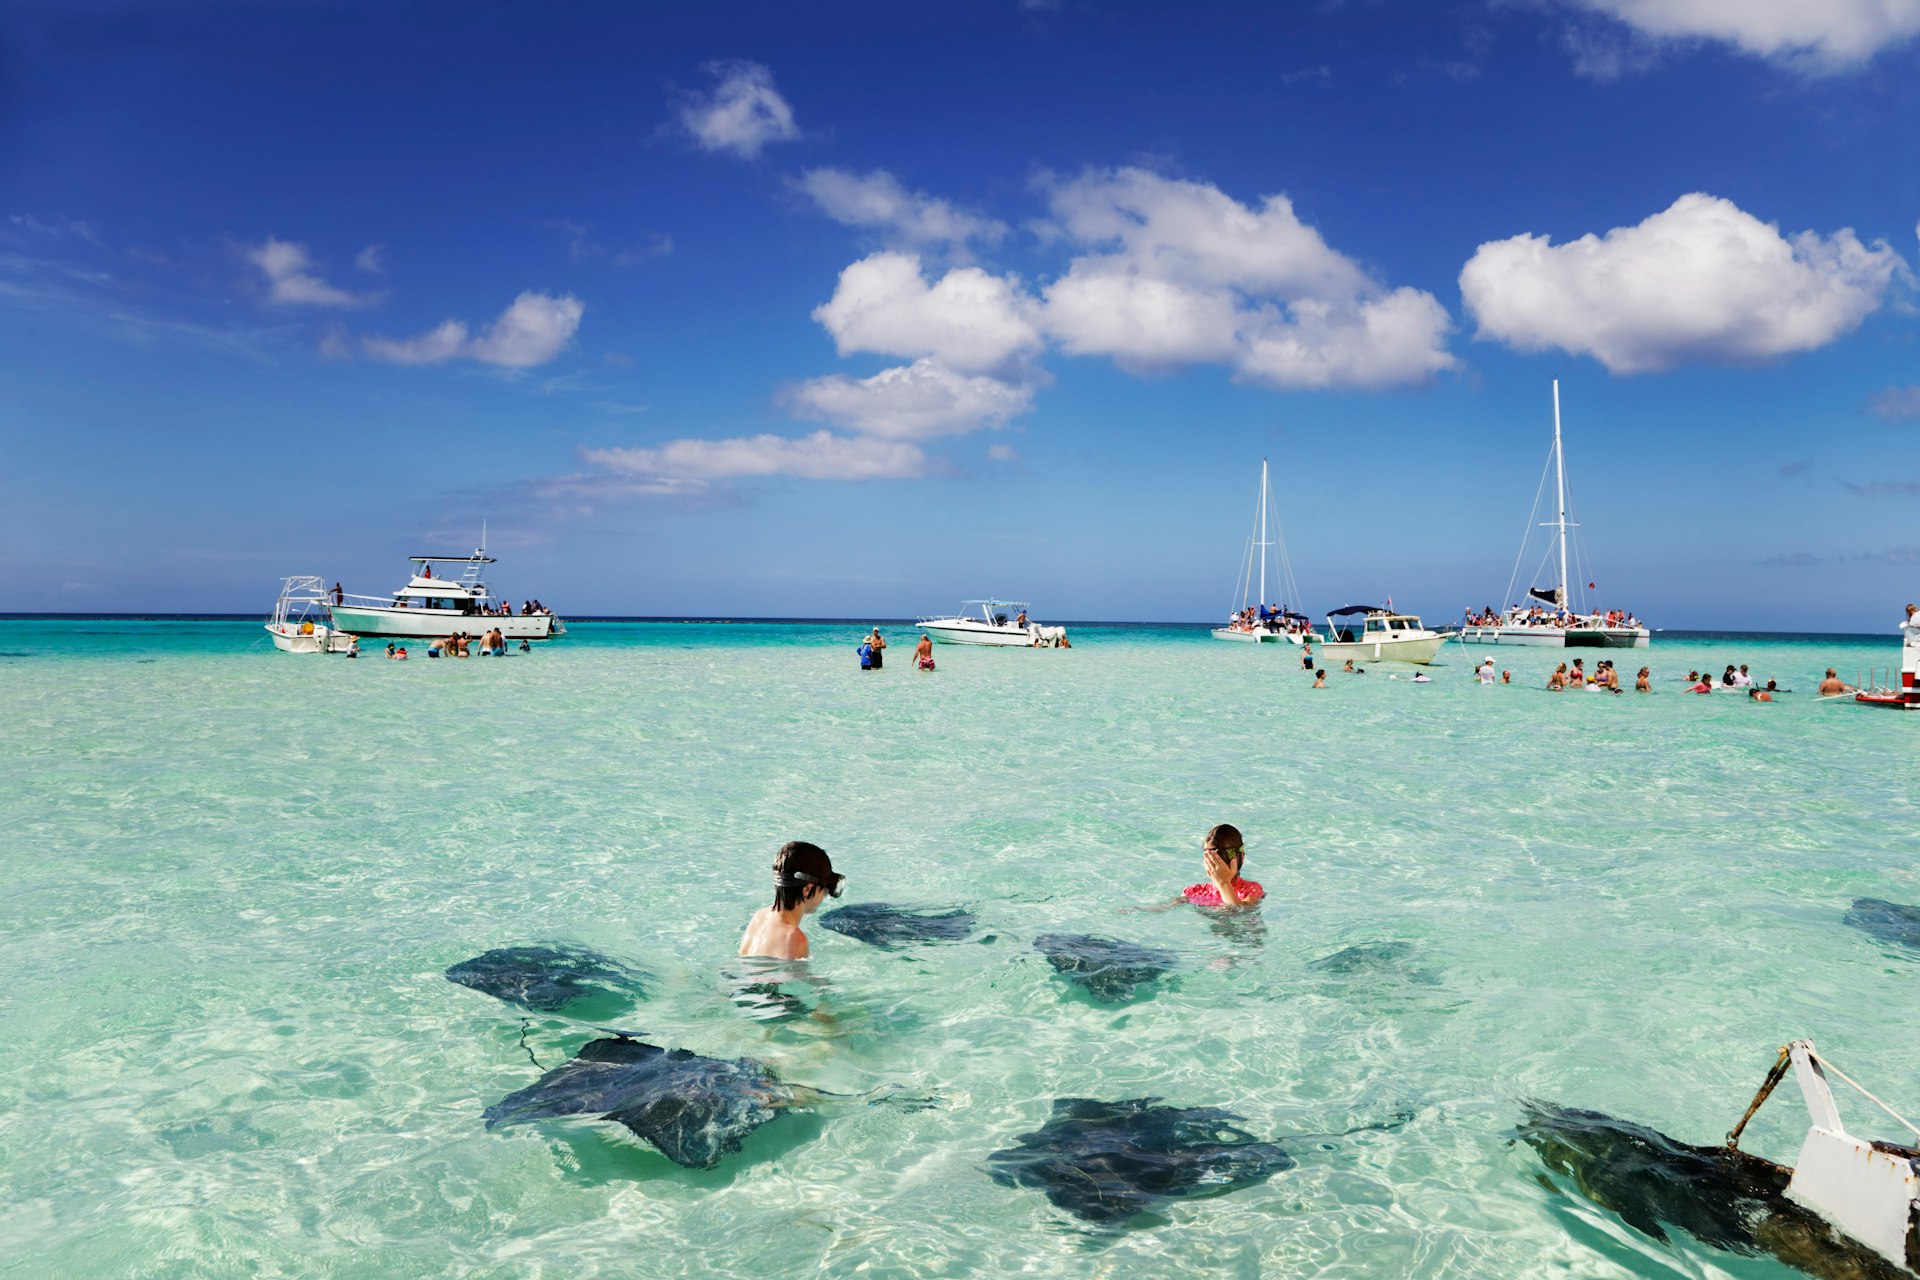 Brother & sister enjoy playing with the stingrays at the sandbar off Grand Cayman